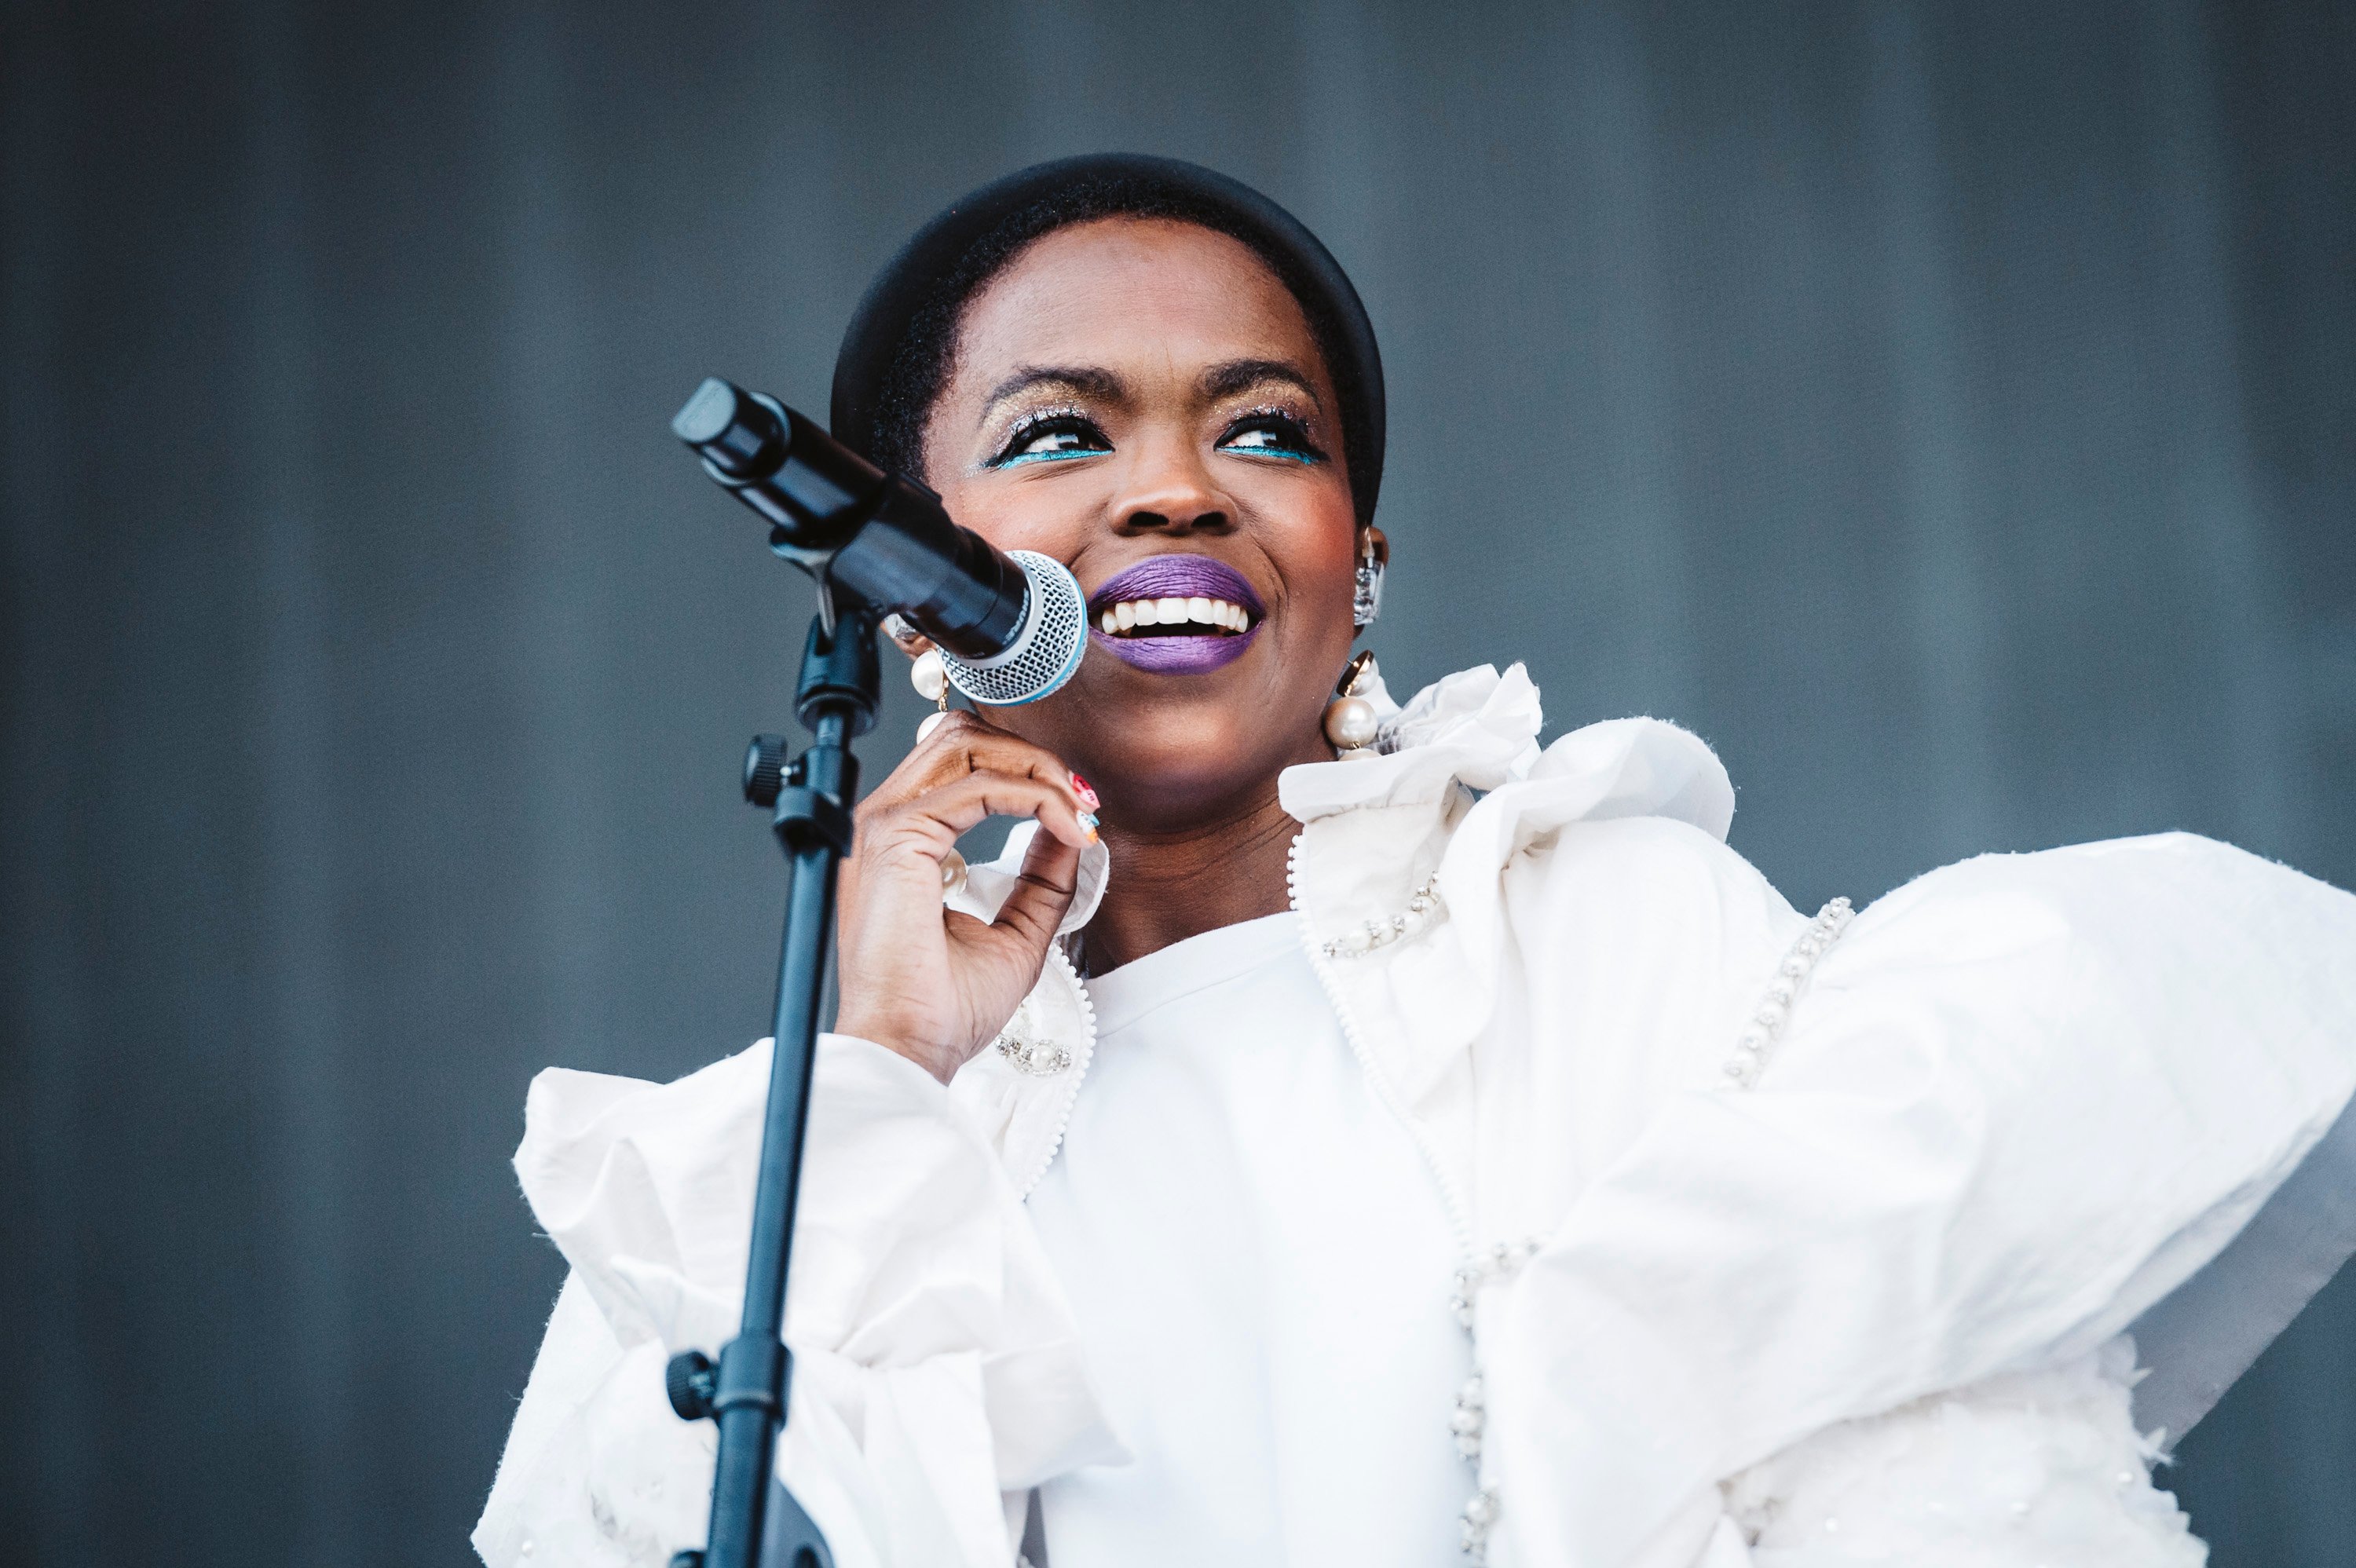 Lauryn Hill performs on stage during day 1 of Madcool Festival